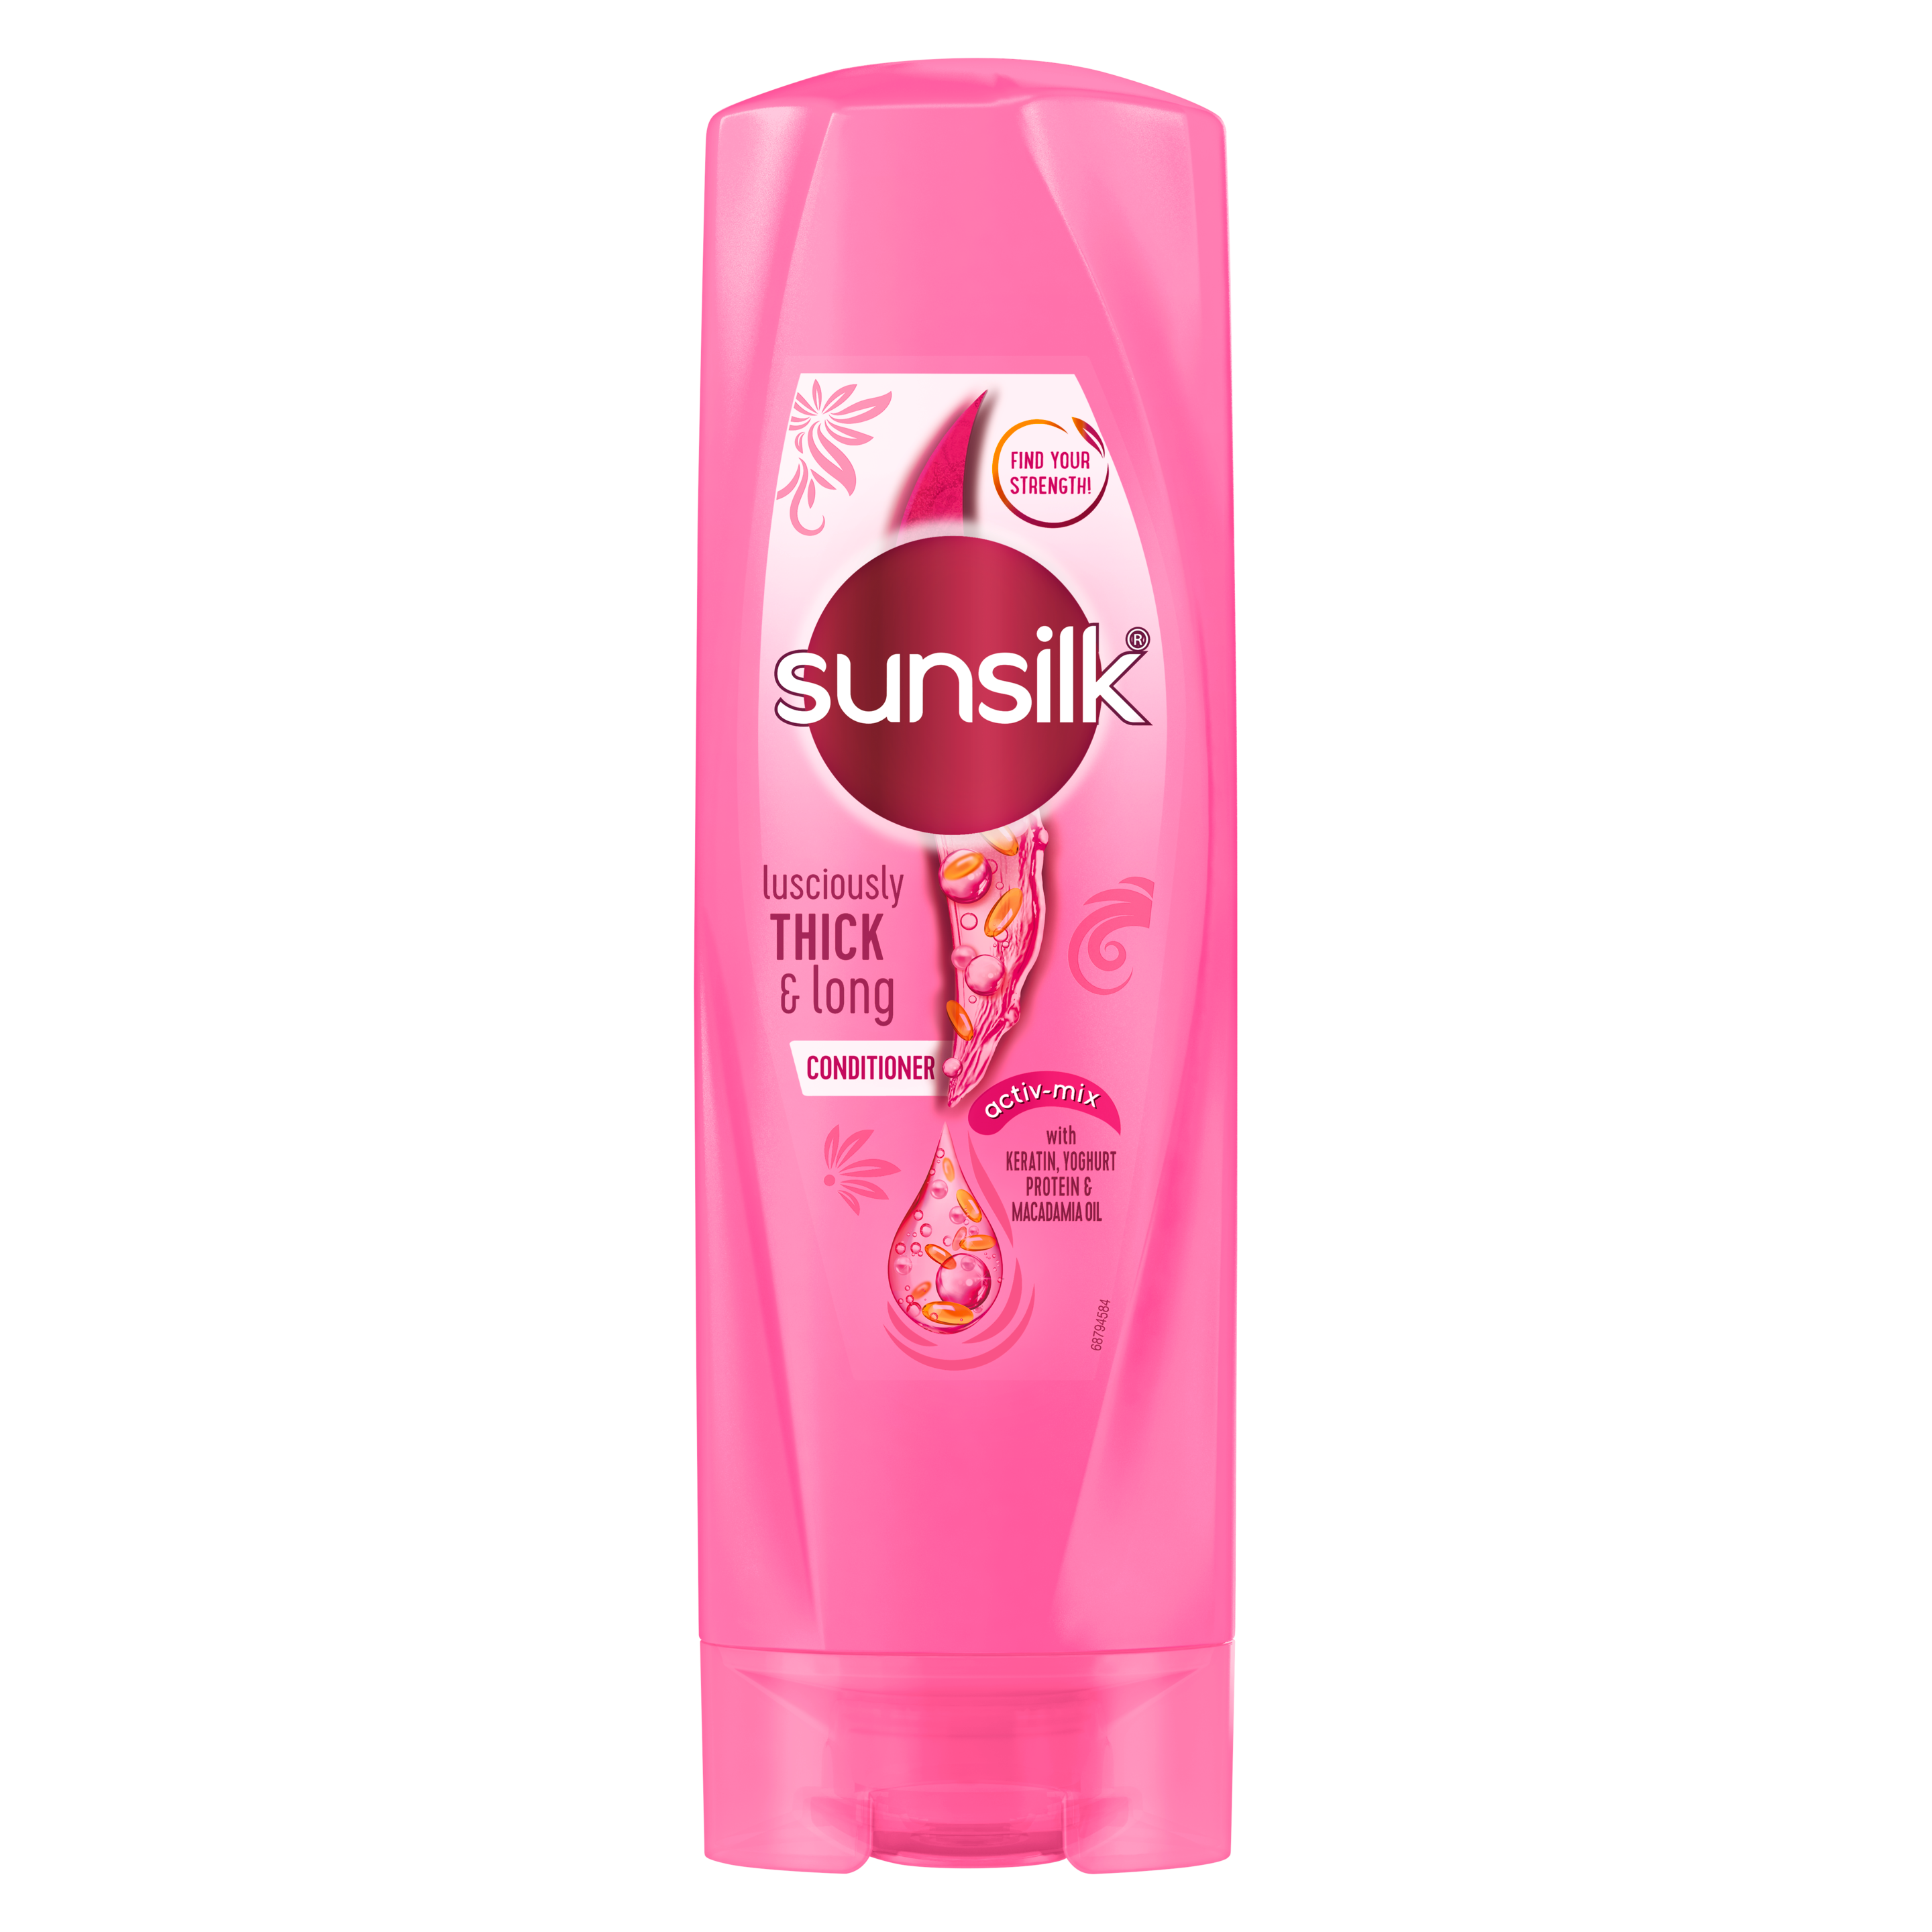 Sunsilk Lusciously Thick & Long Conditioner With Keratin